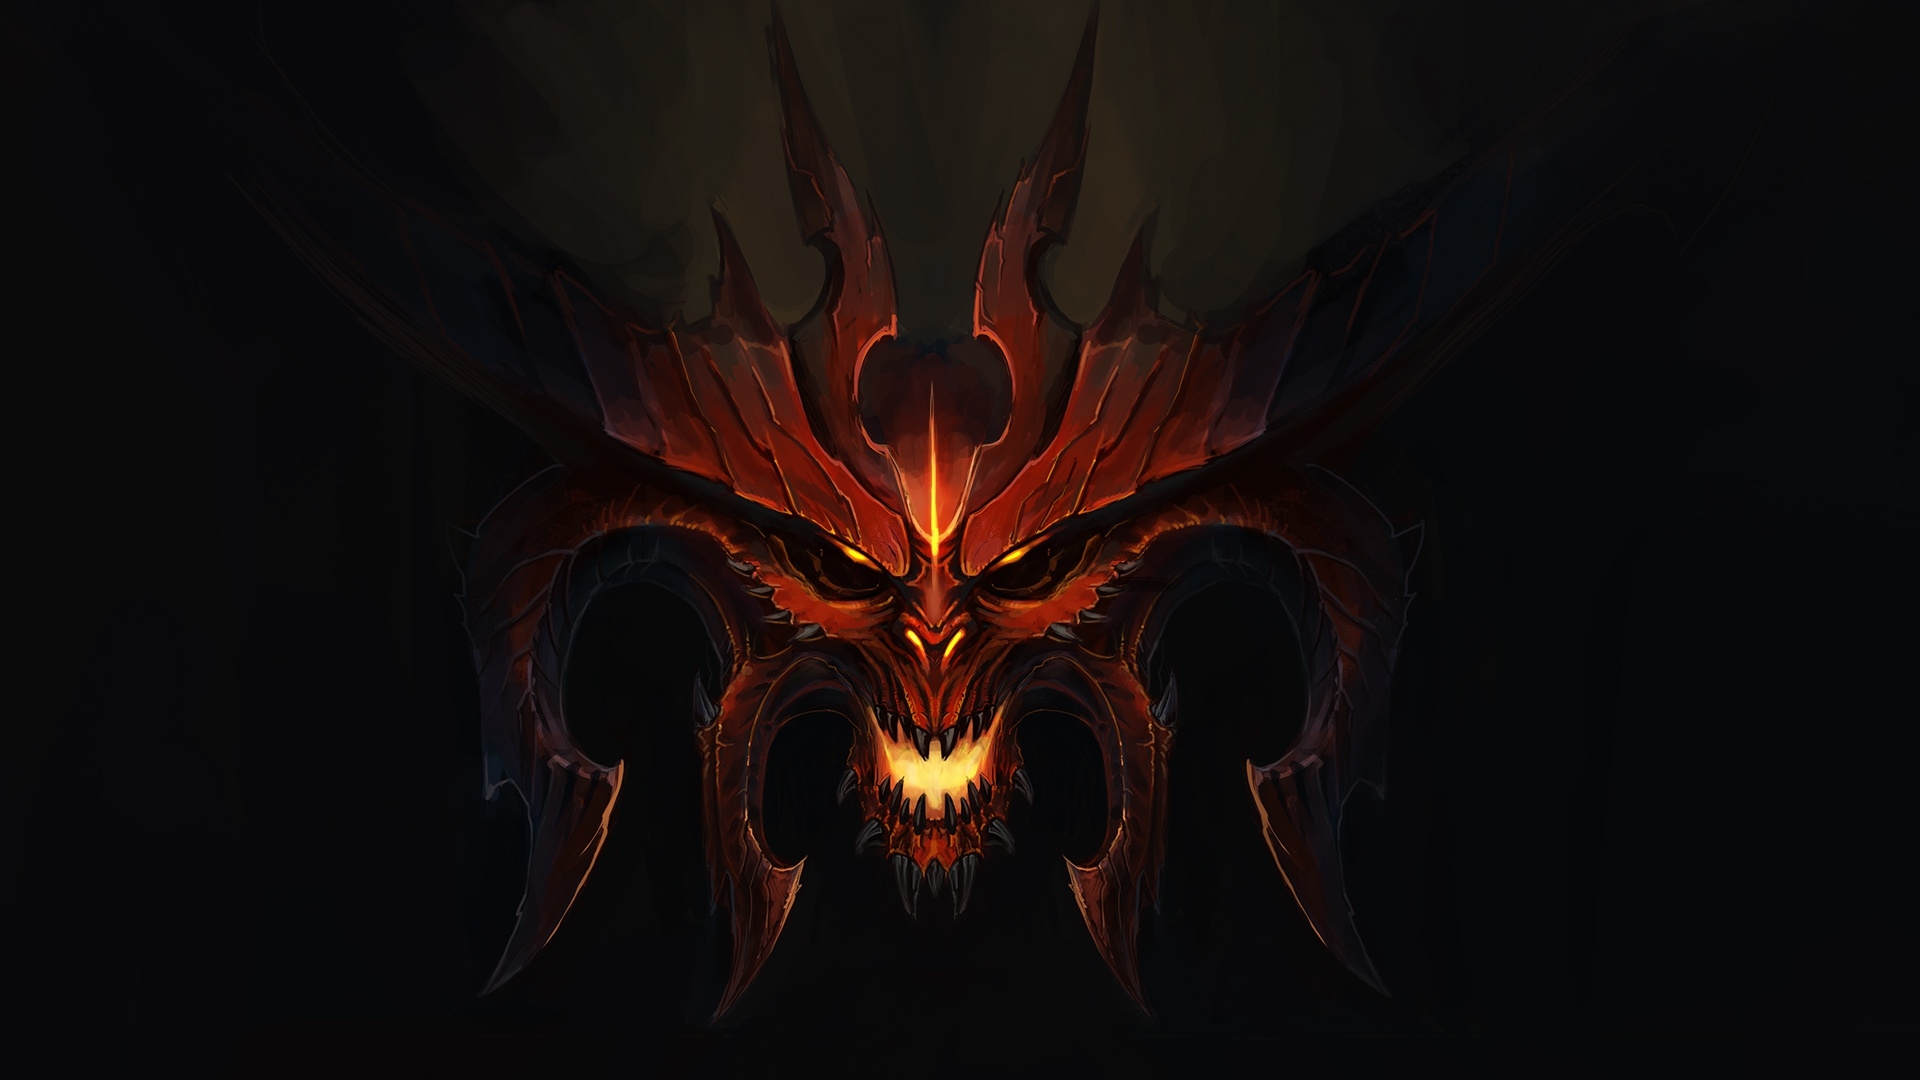 Diablo Wallpaper Hd Games 4k Wallpapers Images Photos And Background